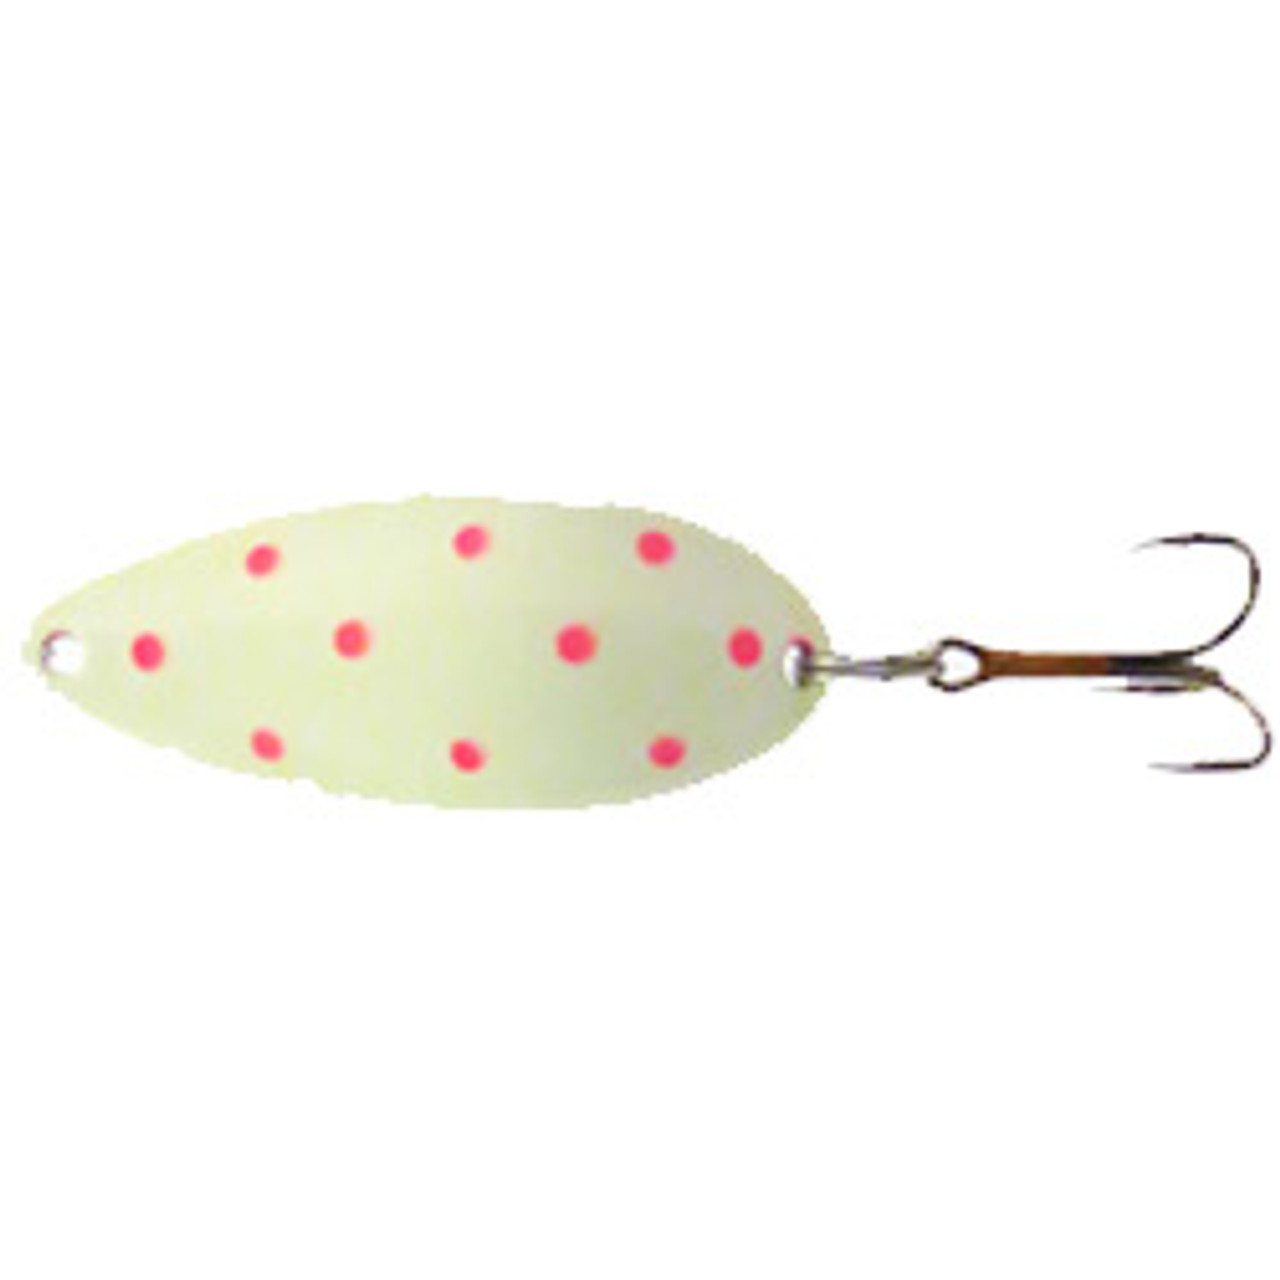 Acme Tackle Little Cleo Fishing Lure, 2/3-Ounce. Gold, Spoons